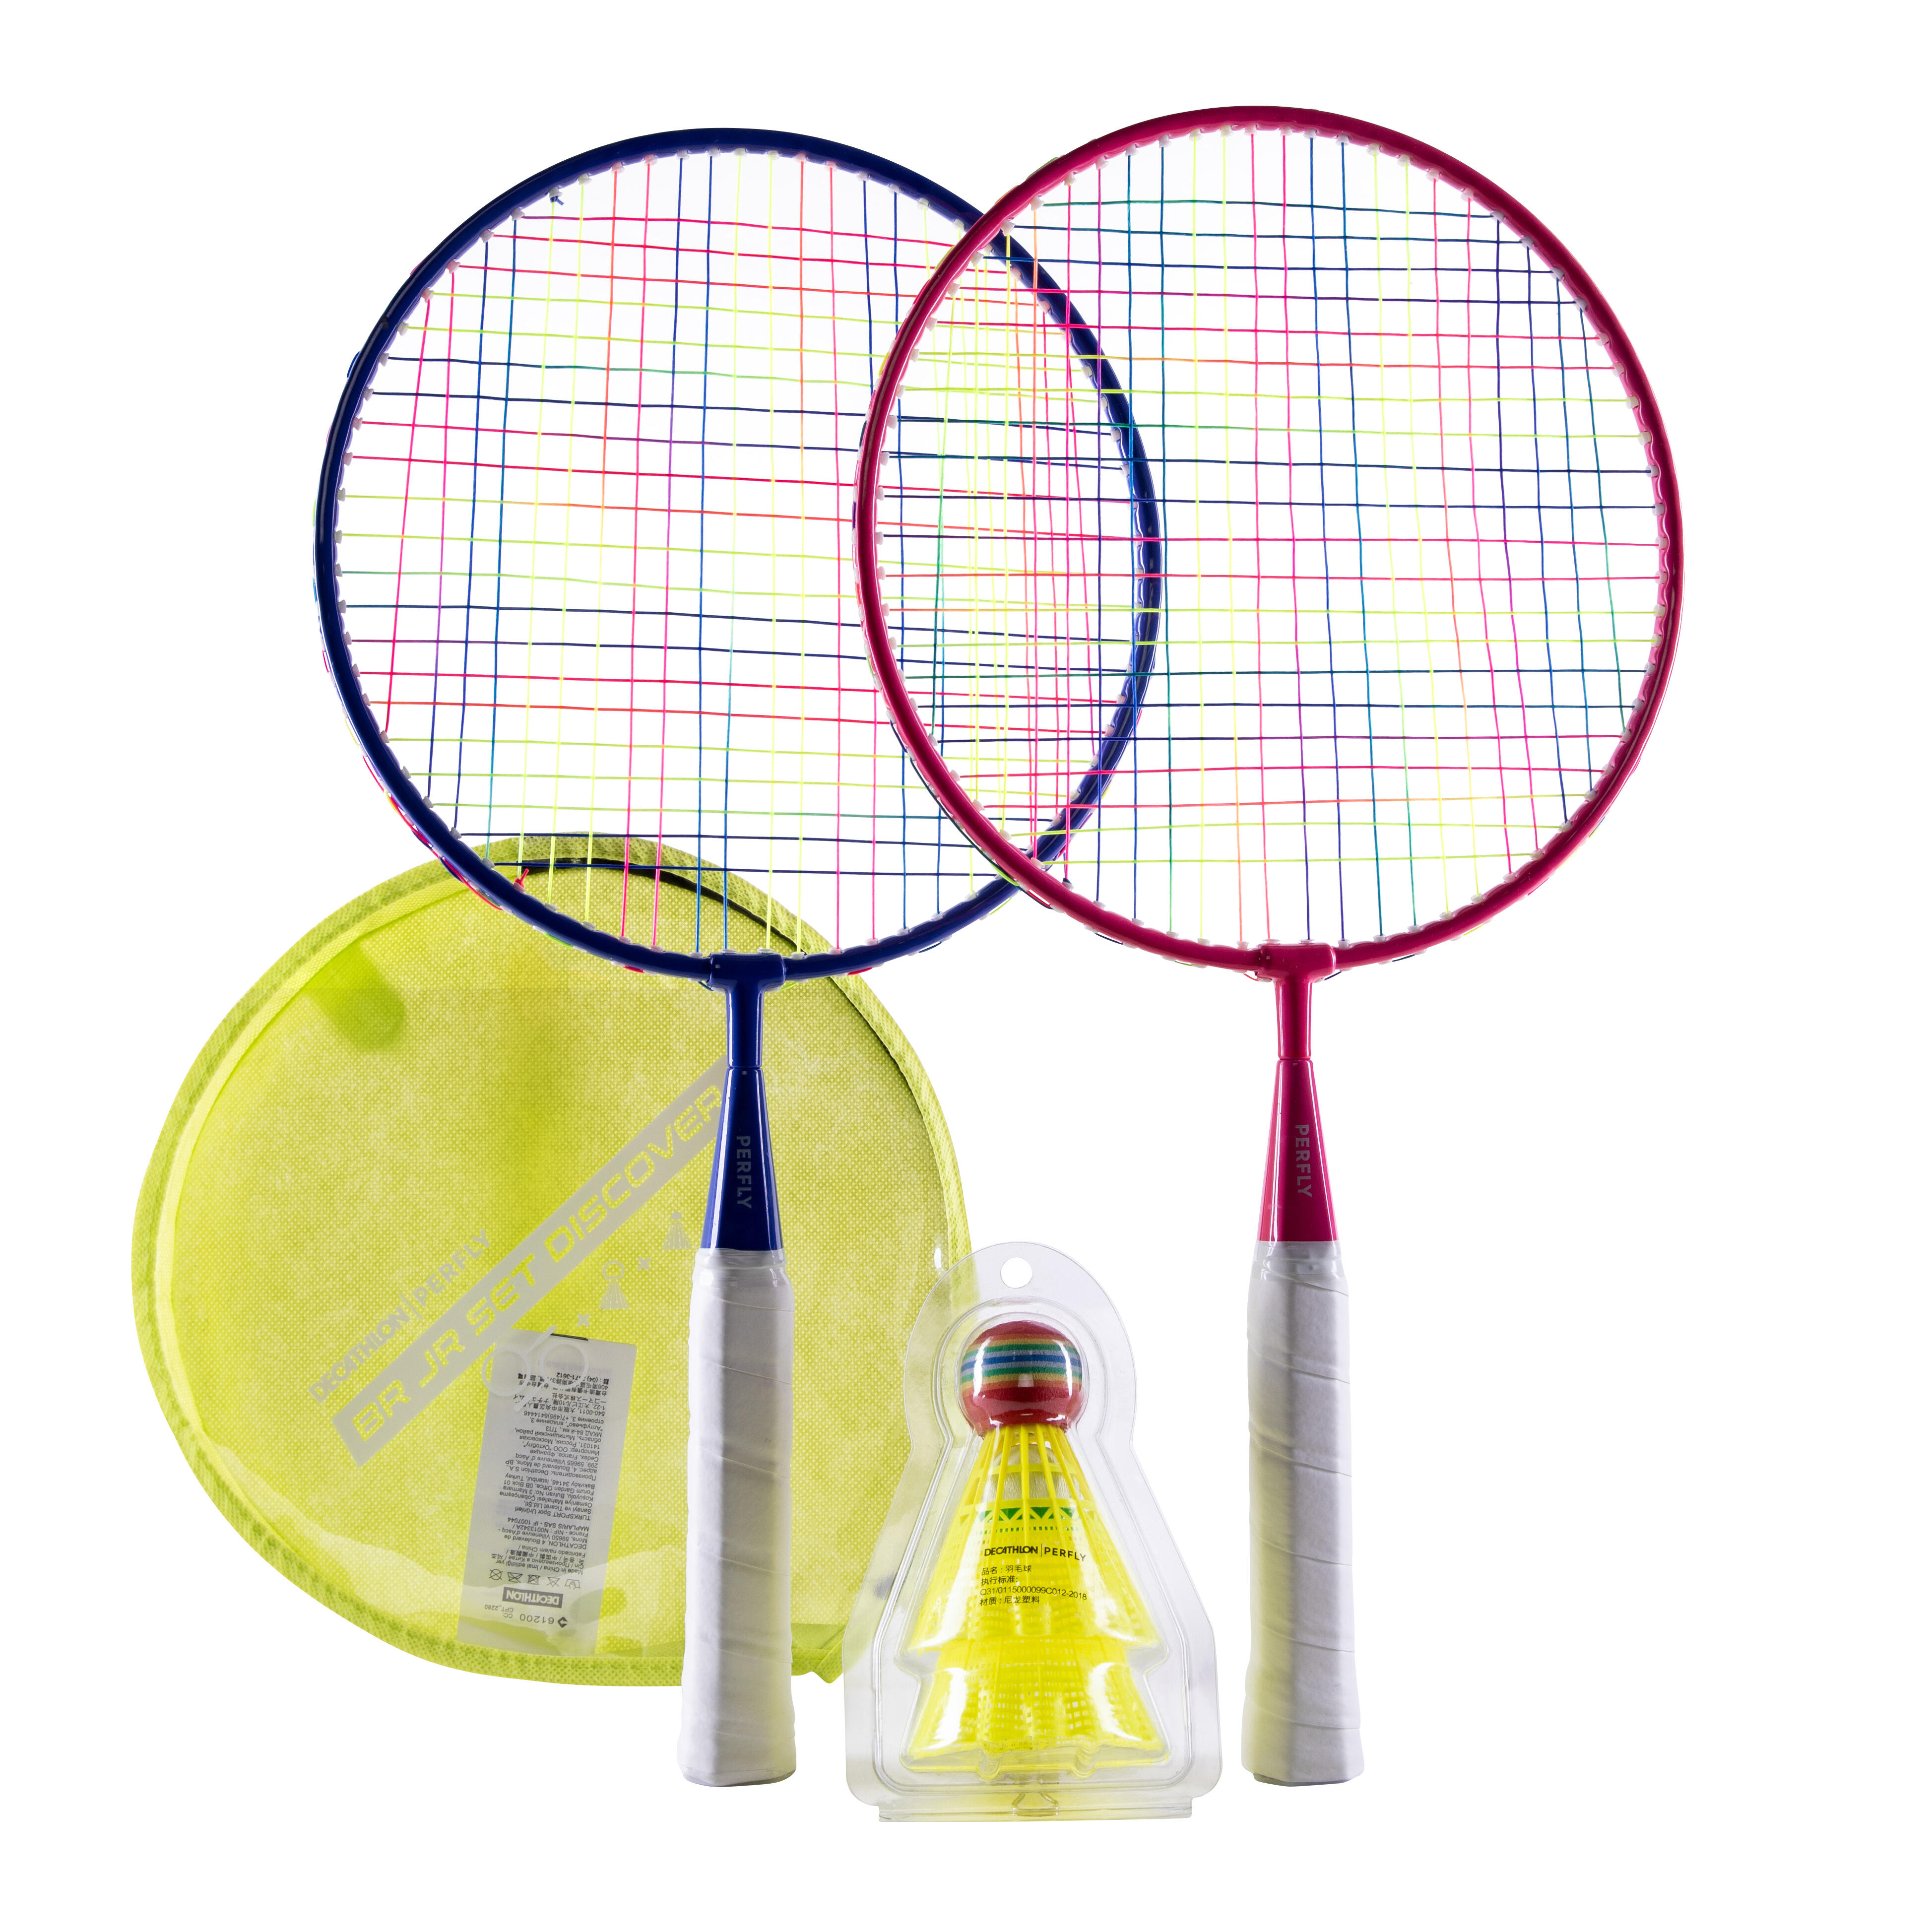 Garneck kids Badminton Racket Set for Beginners Child Indoor Outdoor Sports Games with Tennis Ball and Bag for Kids 8-12 Year Old Pink